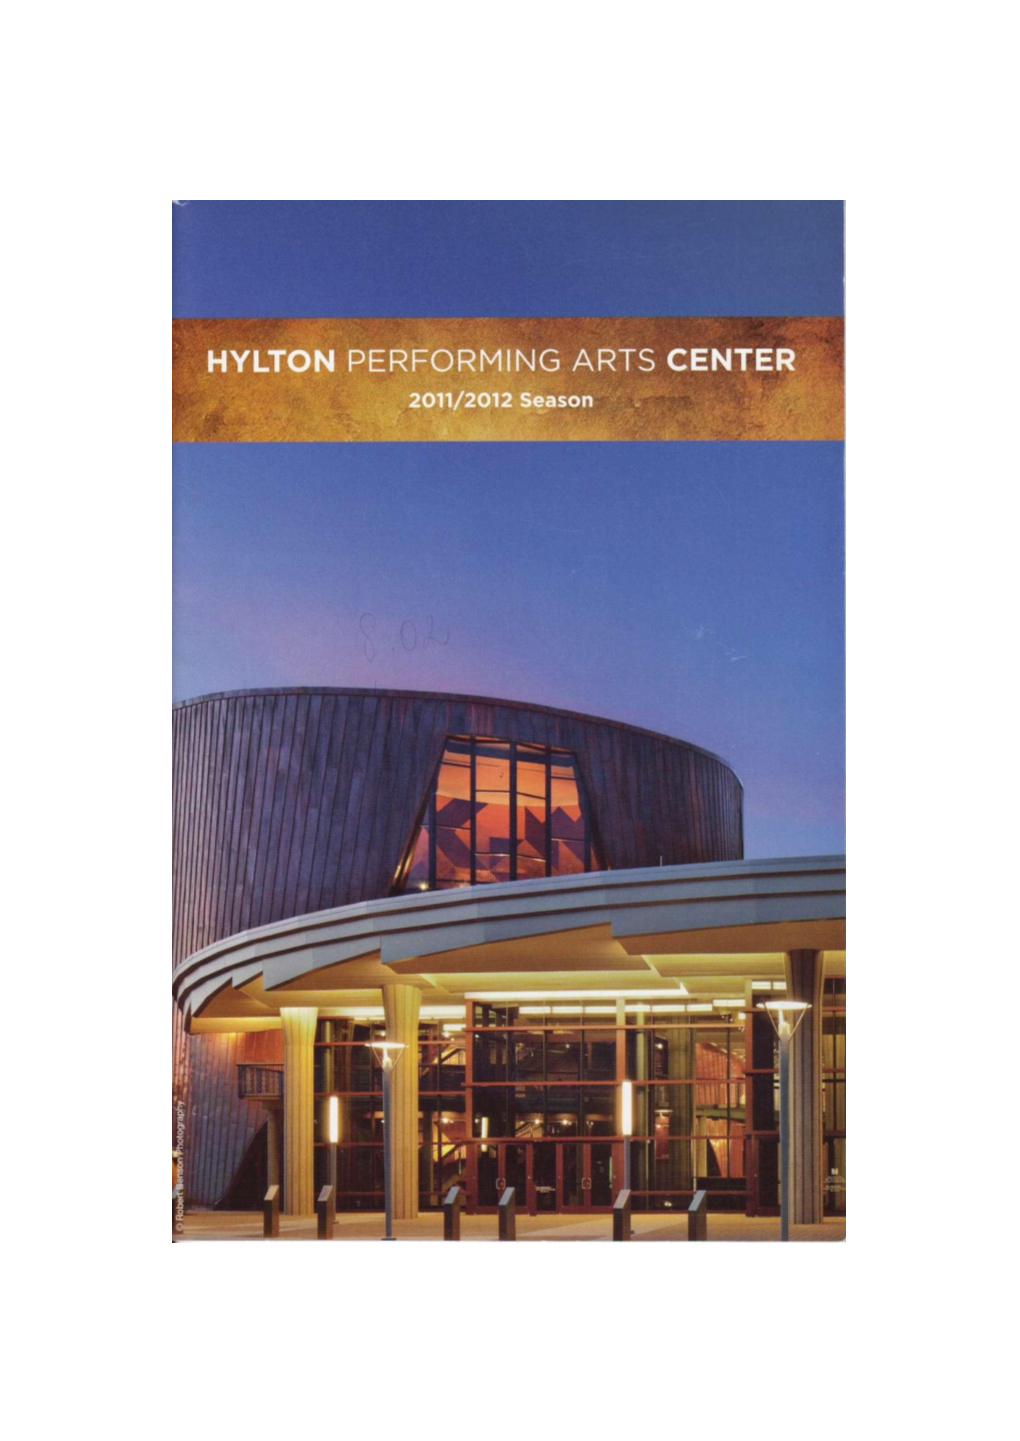 HYLTON CENTER Includes $75+ Gifts to the Hylton Performing Arts Center (January 1, 2011 - December 31,2011)